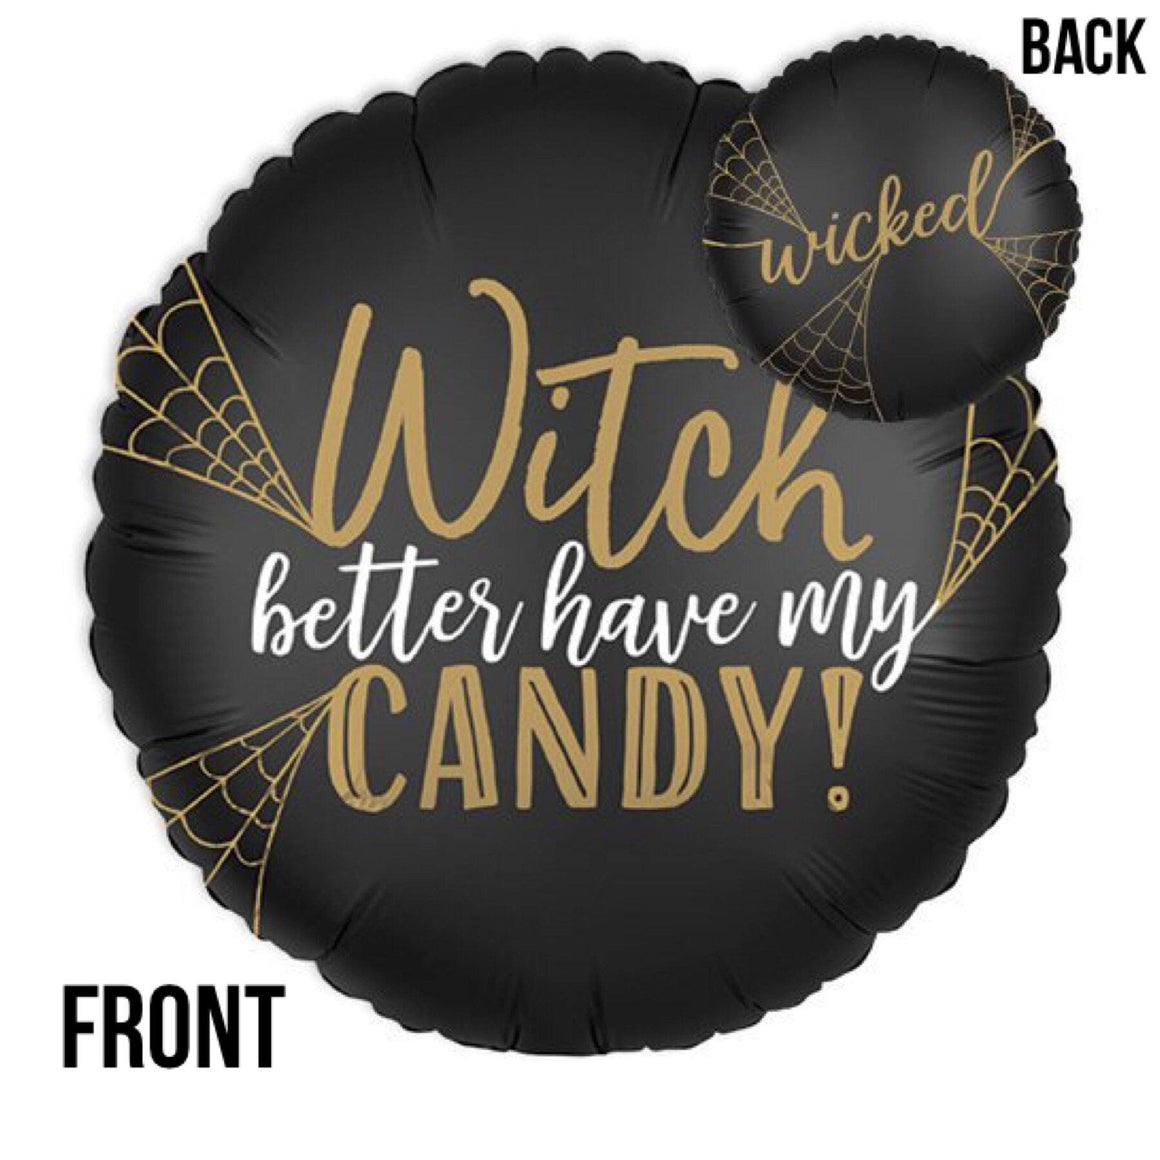 BALLOONS - WITCH BETTER HAVE MY CANDY / WICKED, Balloons, Anagram - Bon + Co. Party Studio